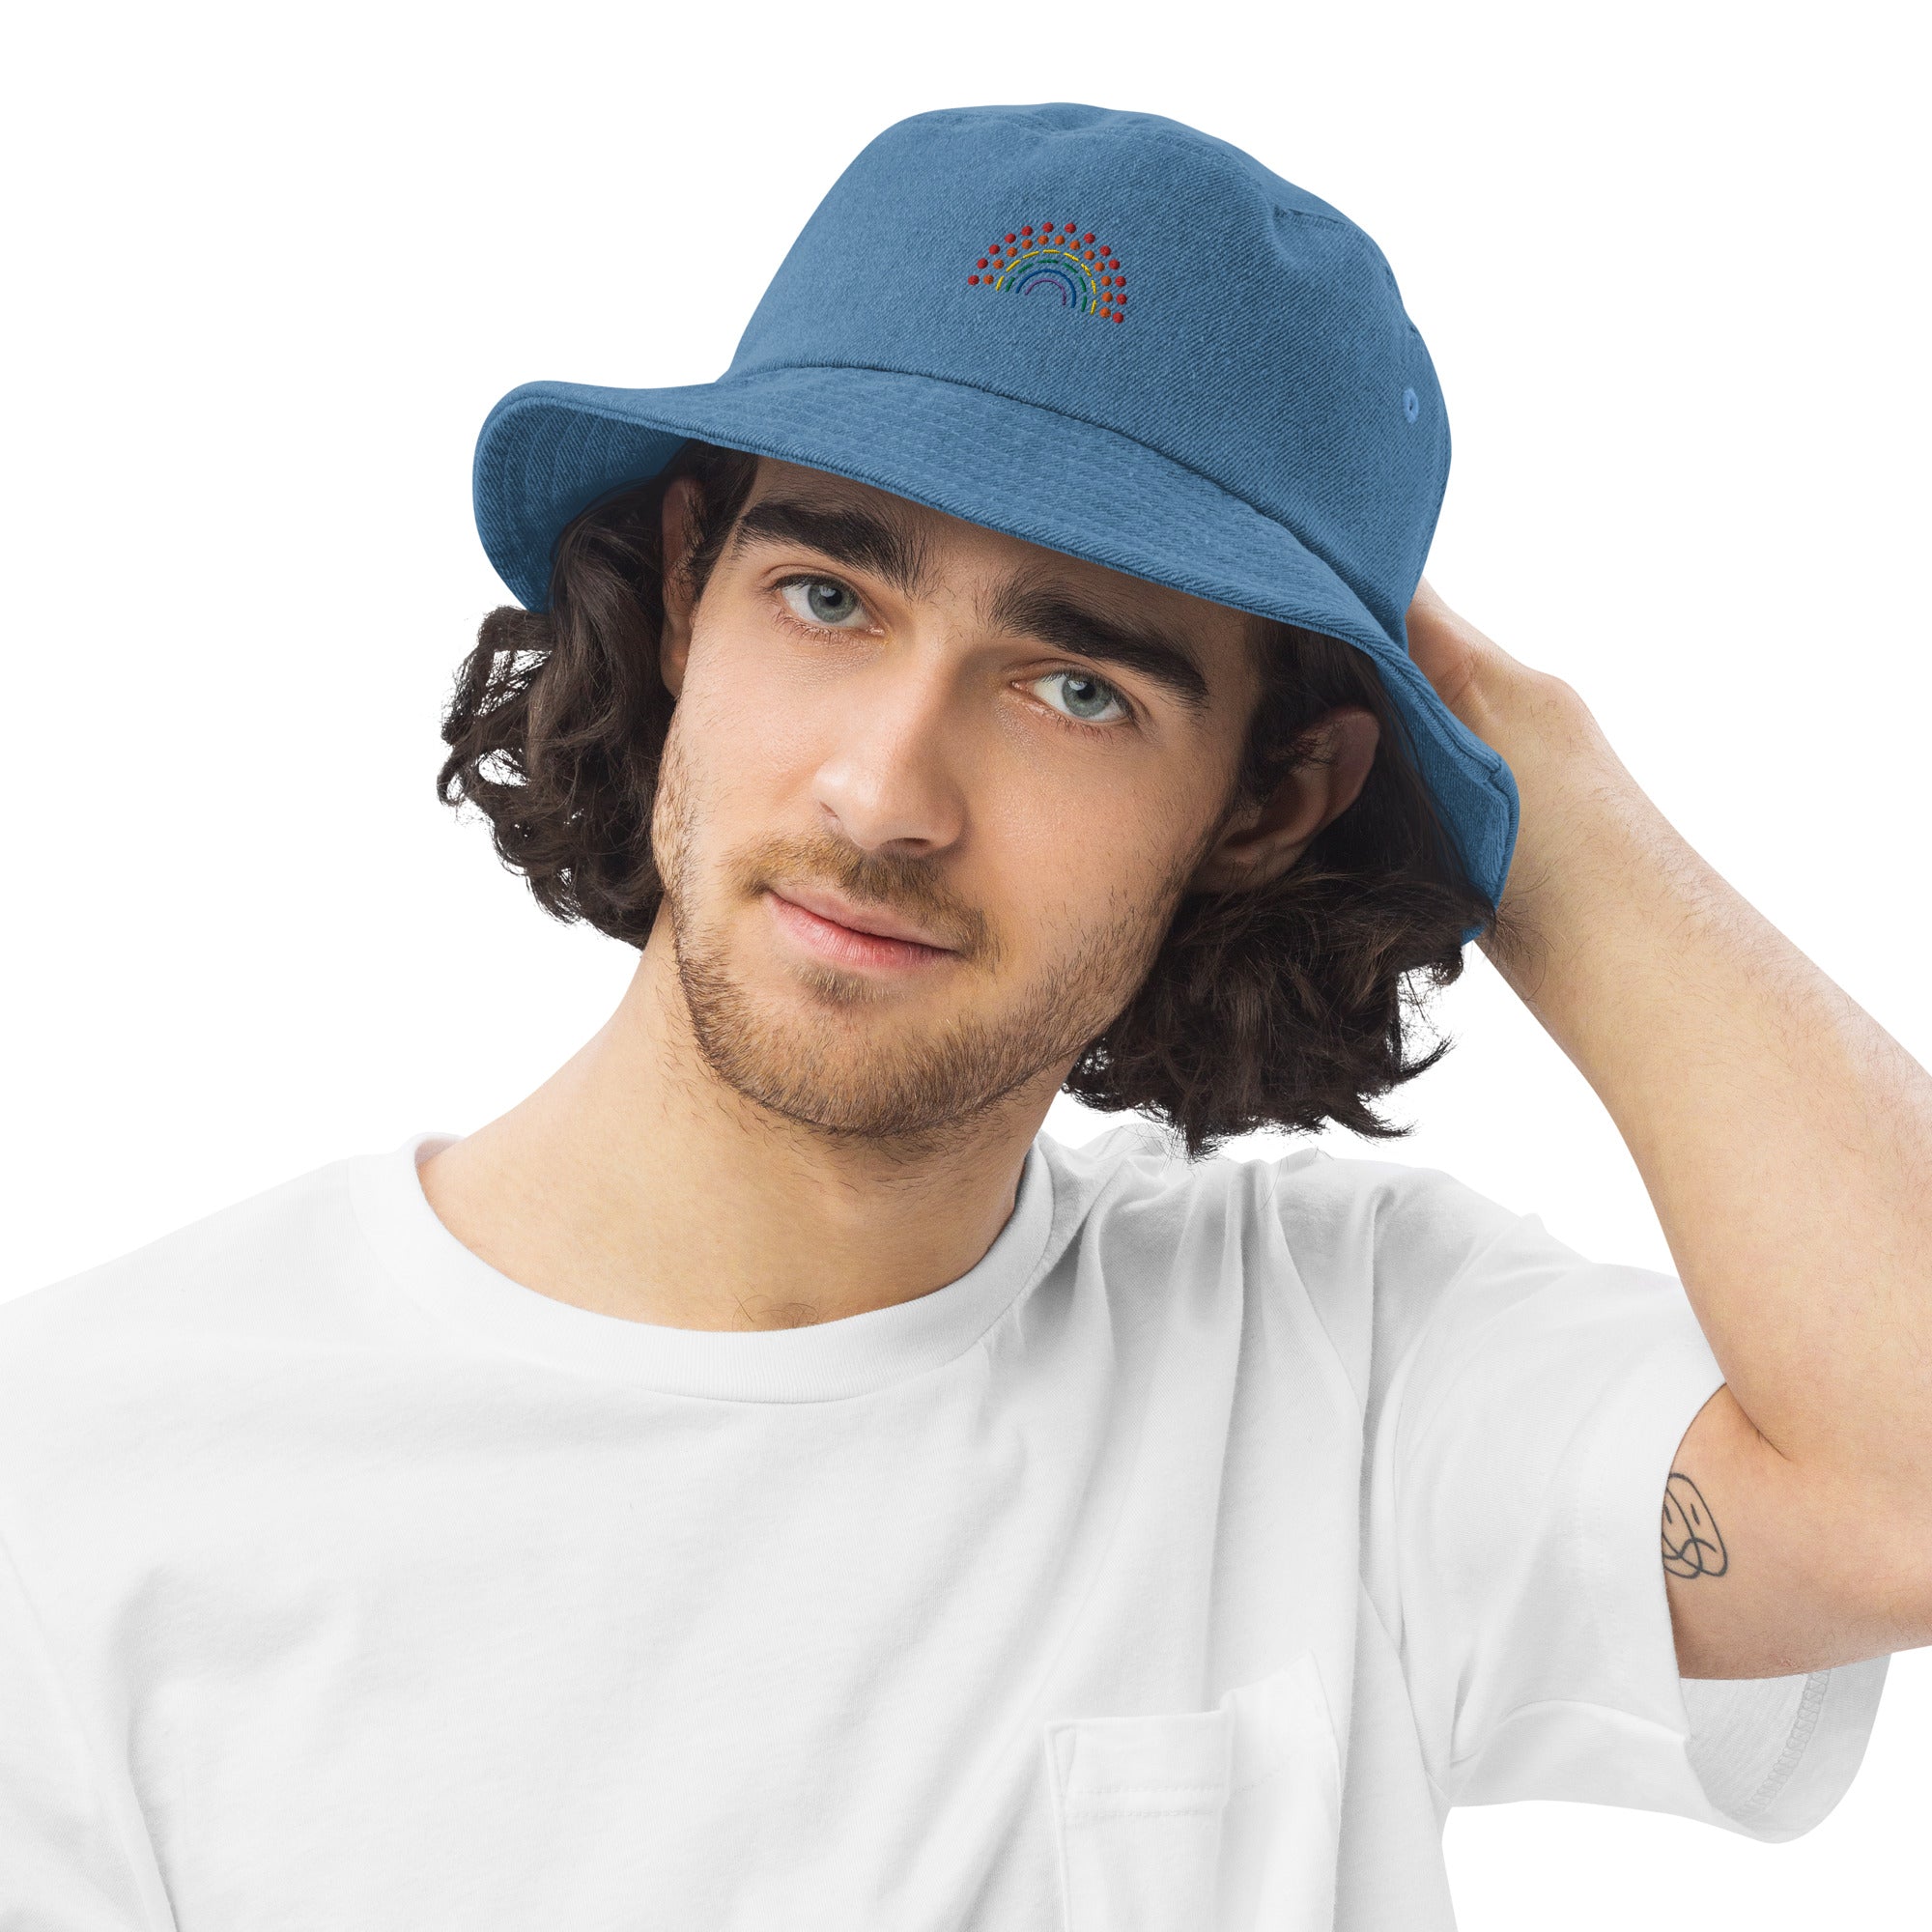 person wearing a light blue denim bucket hat with multicolored pride rainbow embroidered on center of the hat